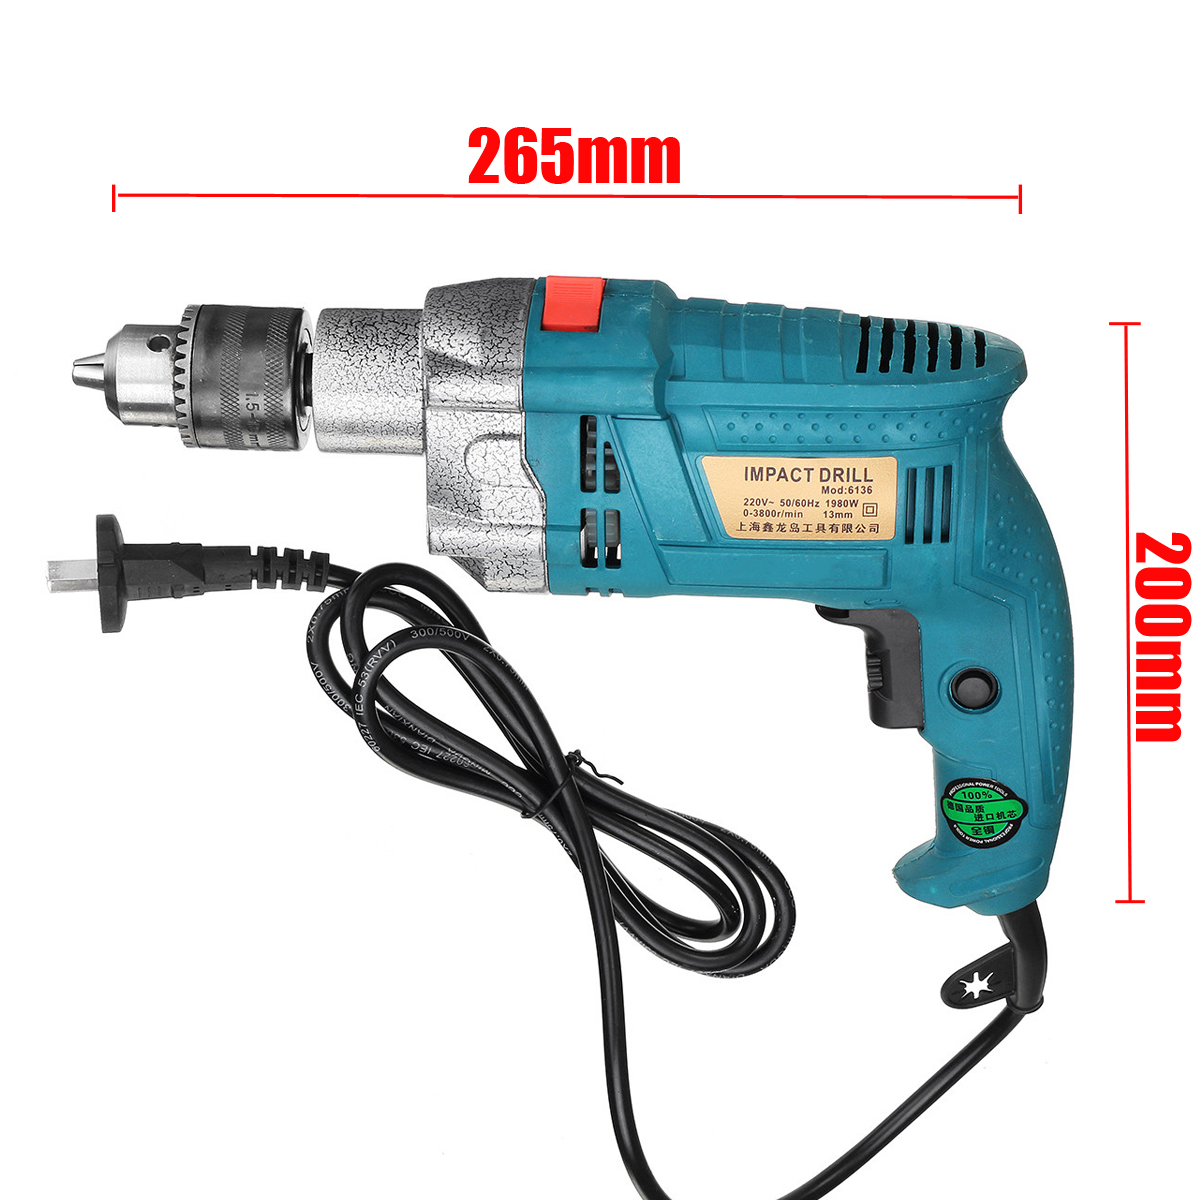 1980W-220V-Electric-Impact-Hammer-Drill-Household-Power-Flat-Drill-3800RPM-1466932-9